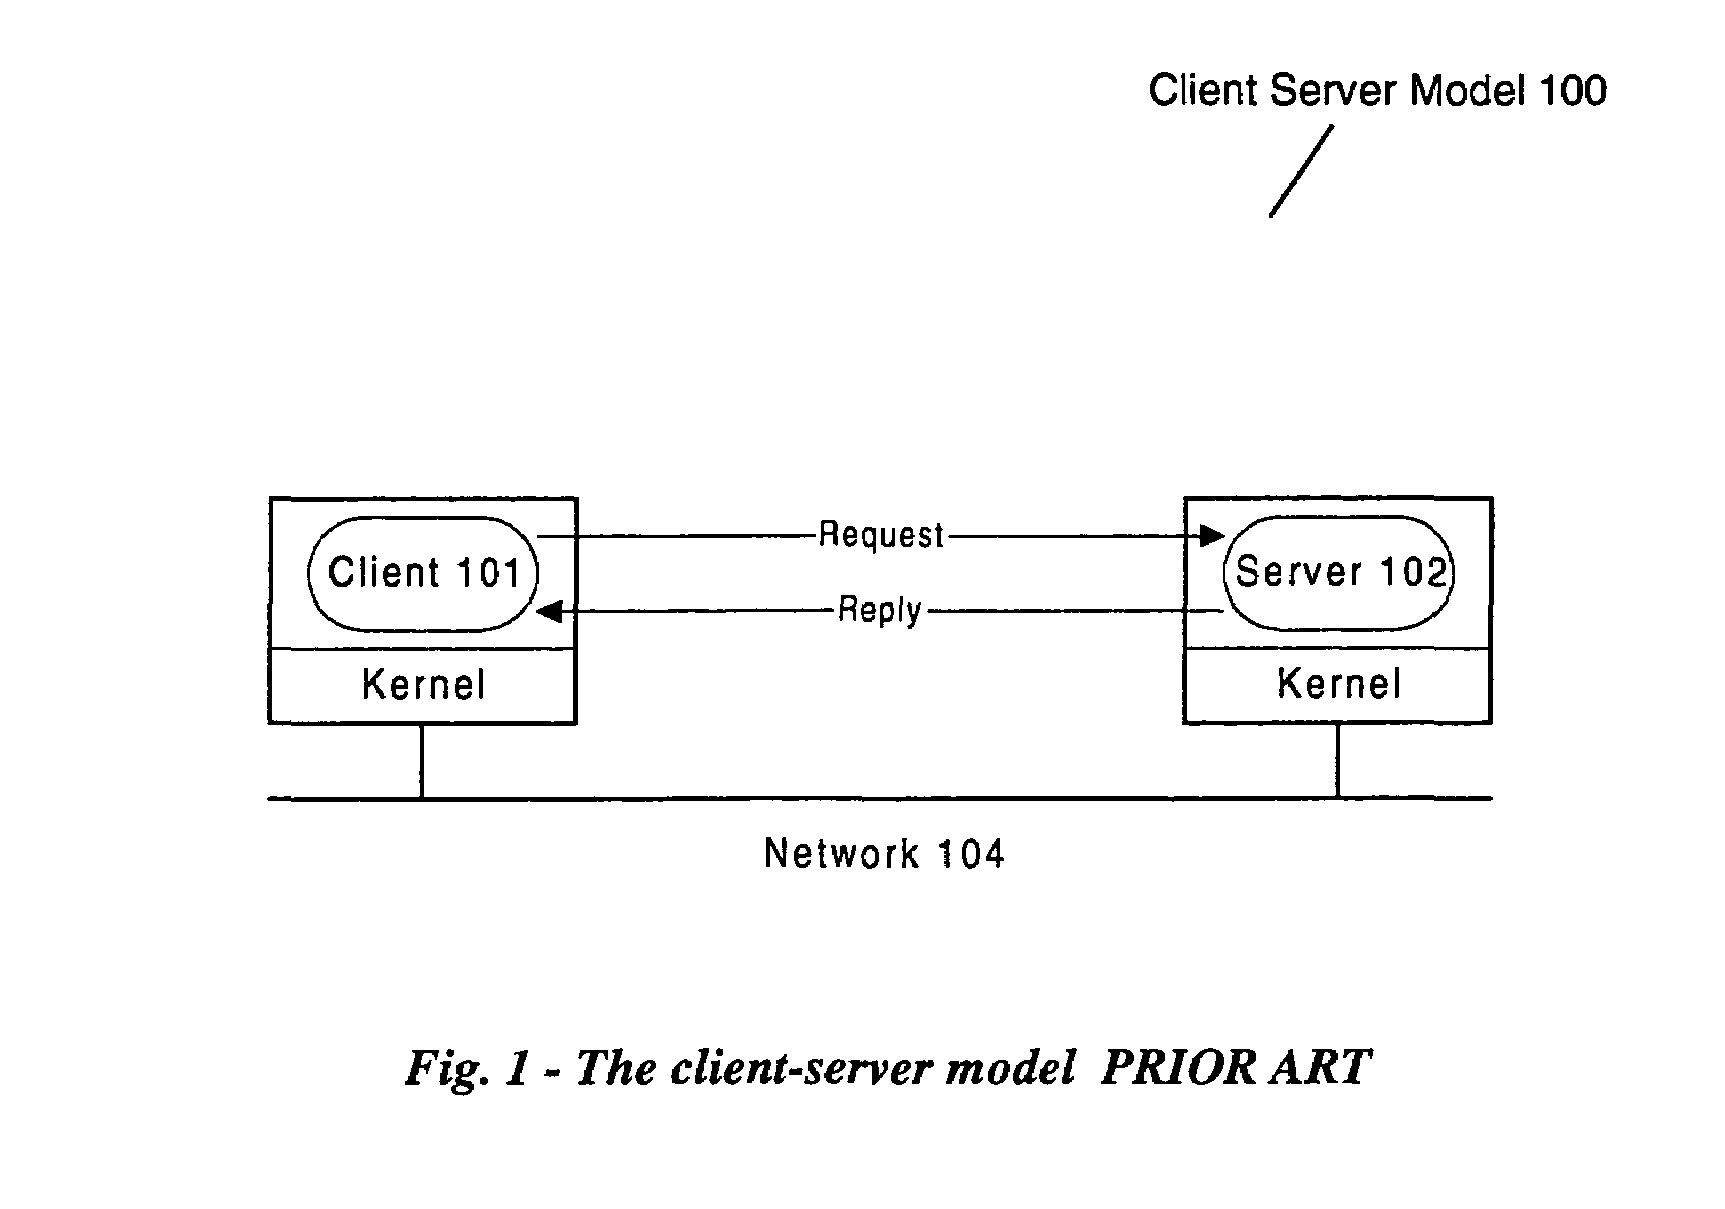 Monitoring latency of a network to manage termination of distributed transactions